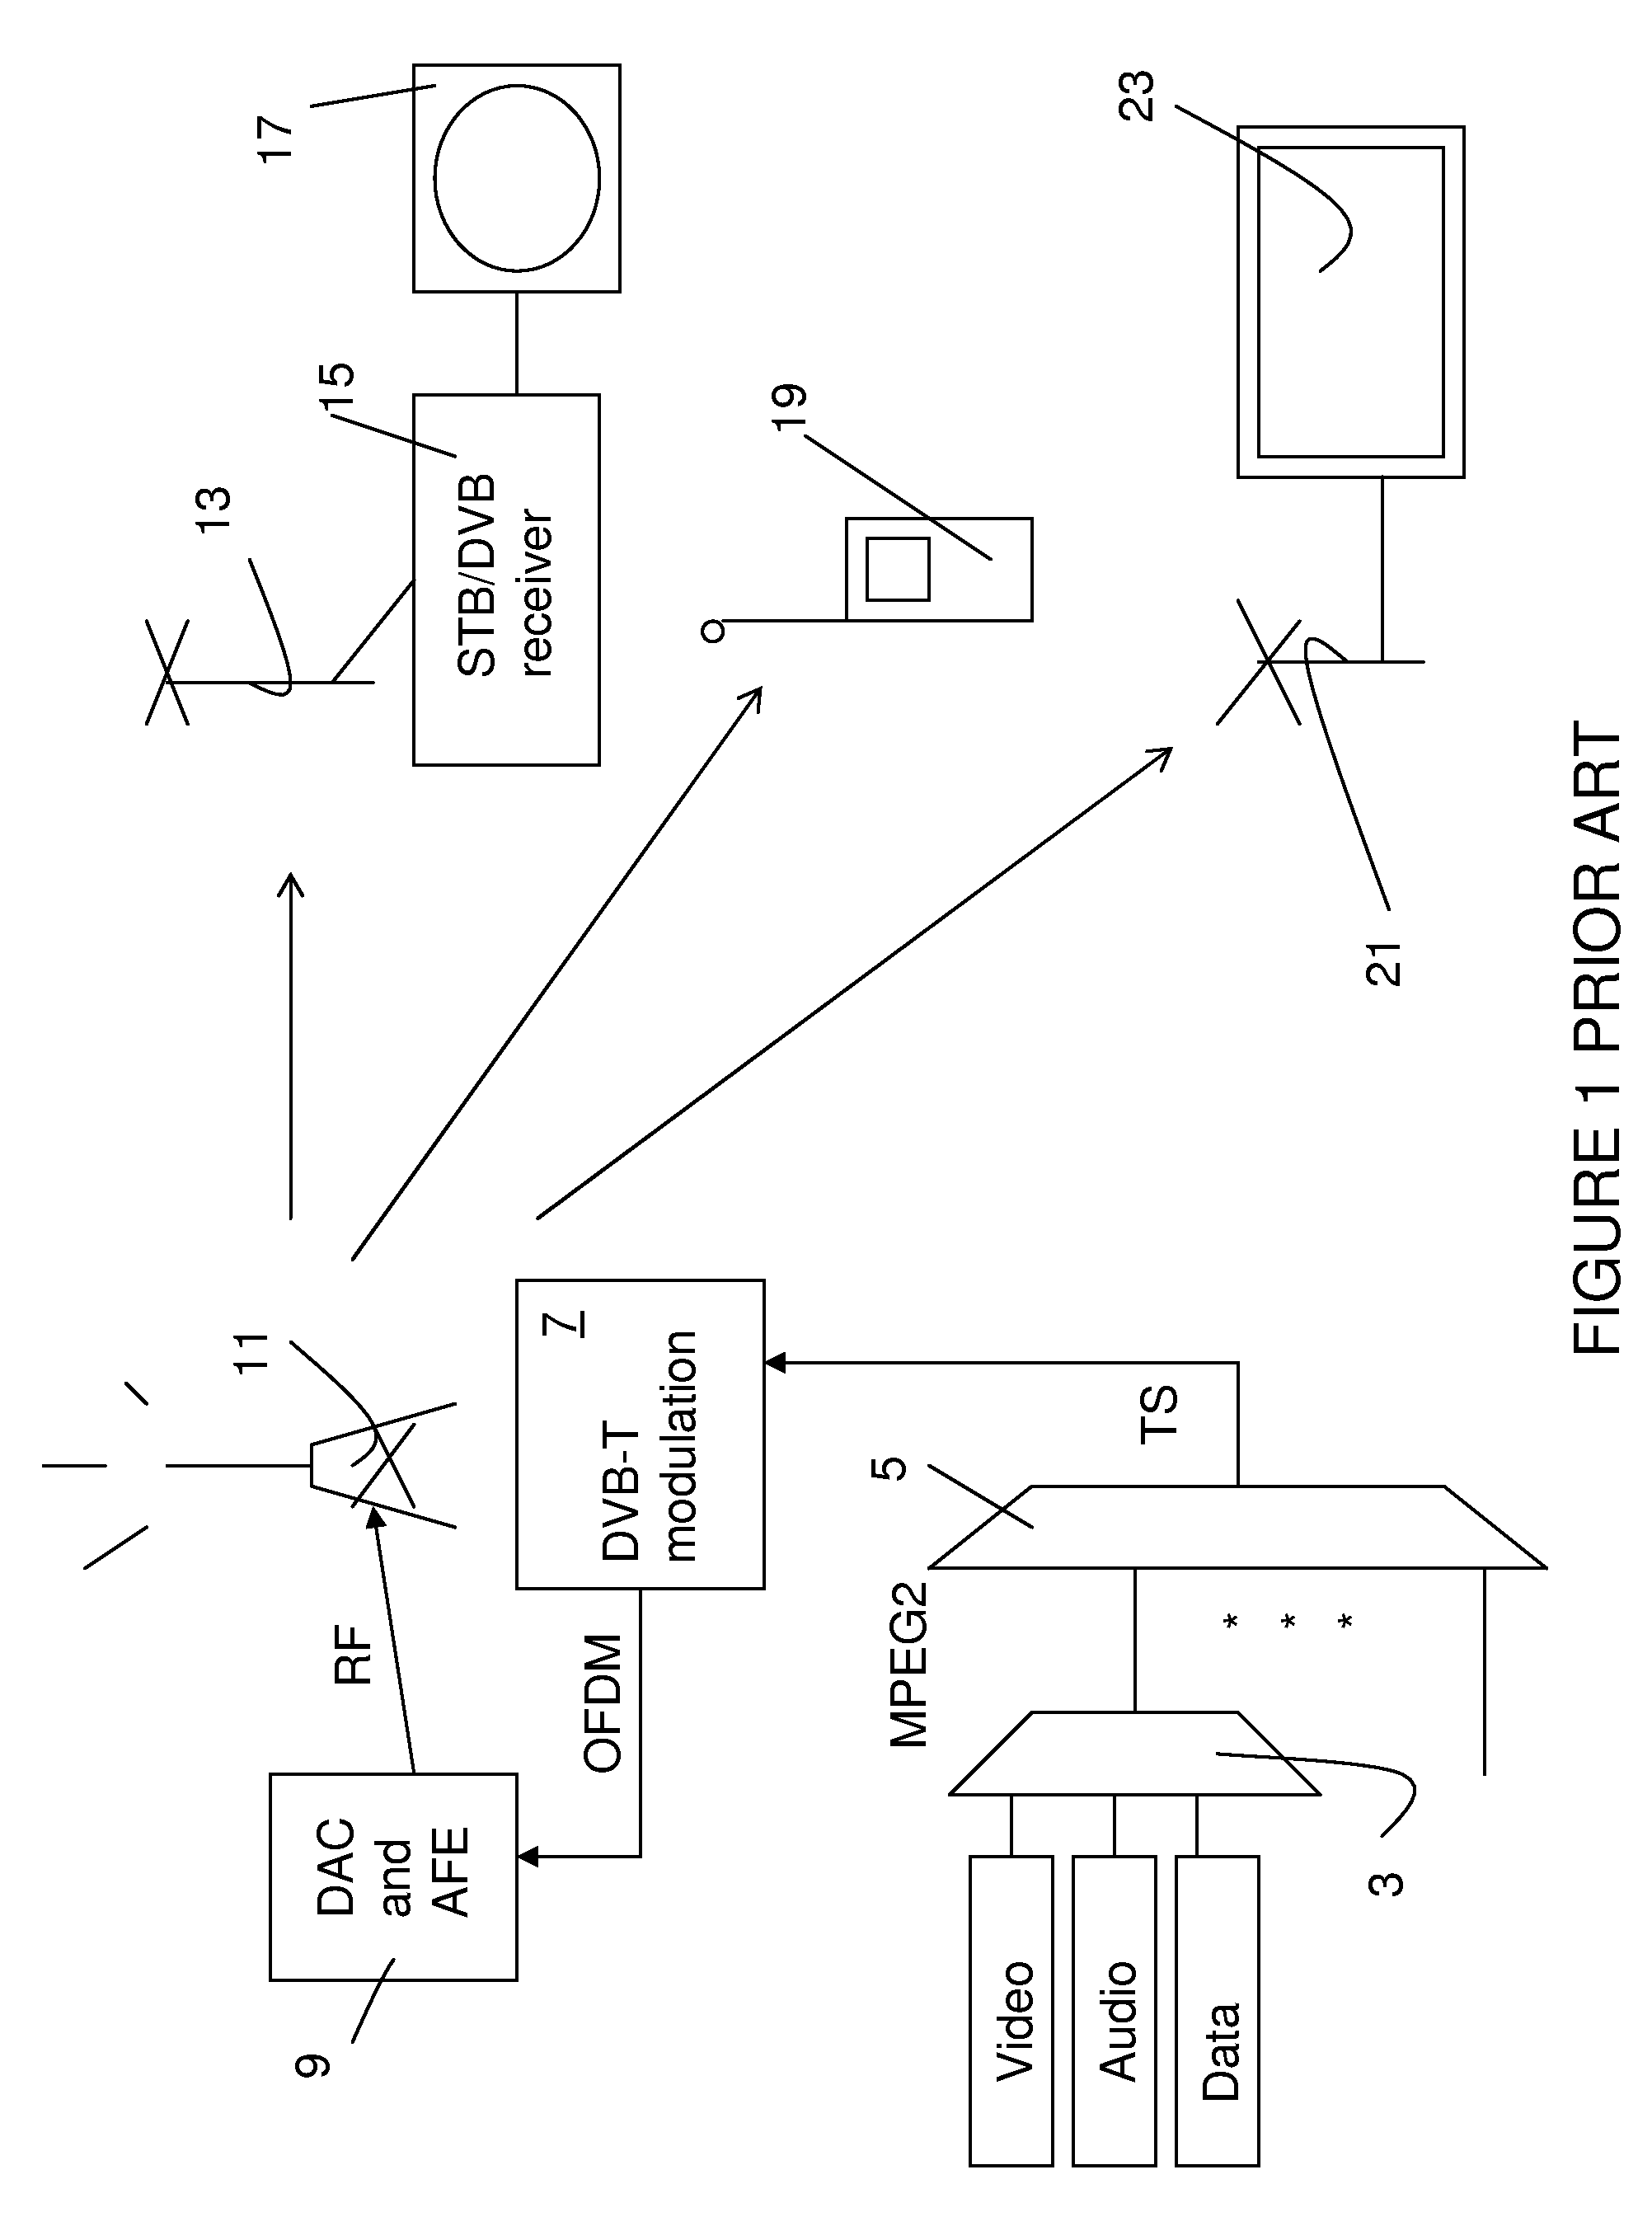 System and Methods for Receiving OFDM Symbols Having Timing and Frequency Offsets